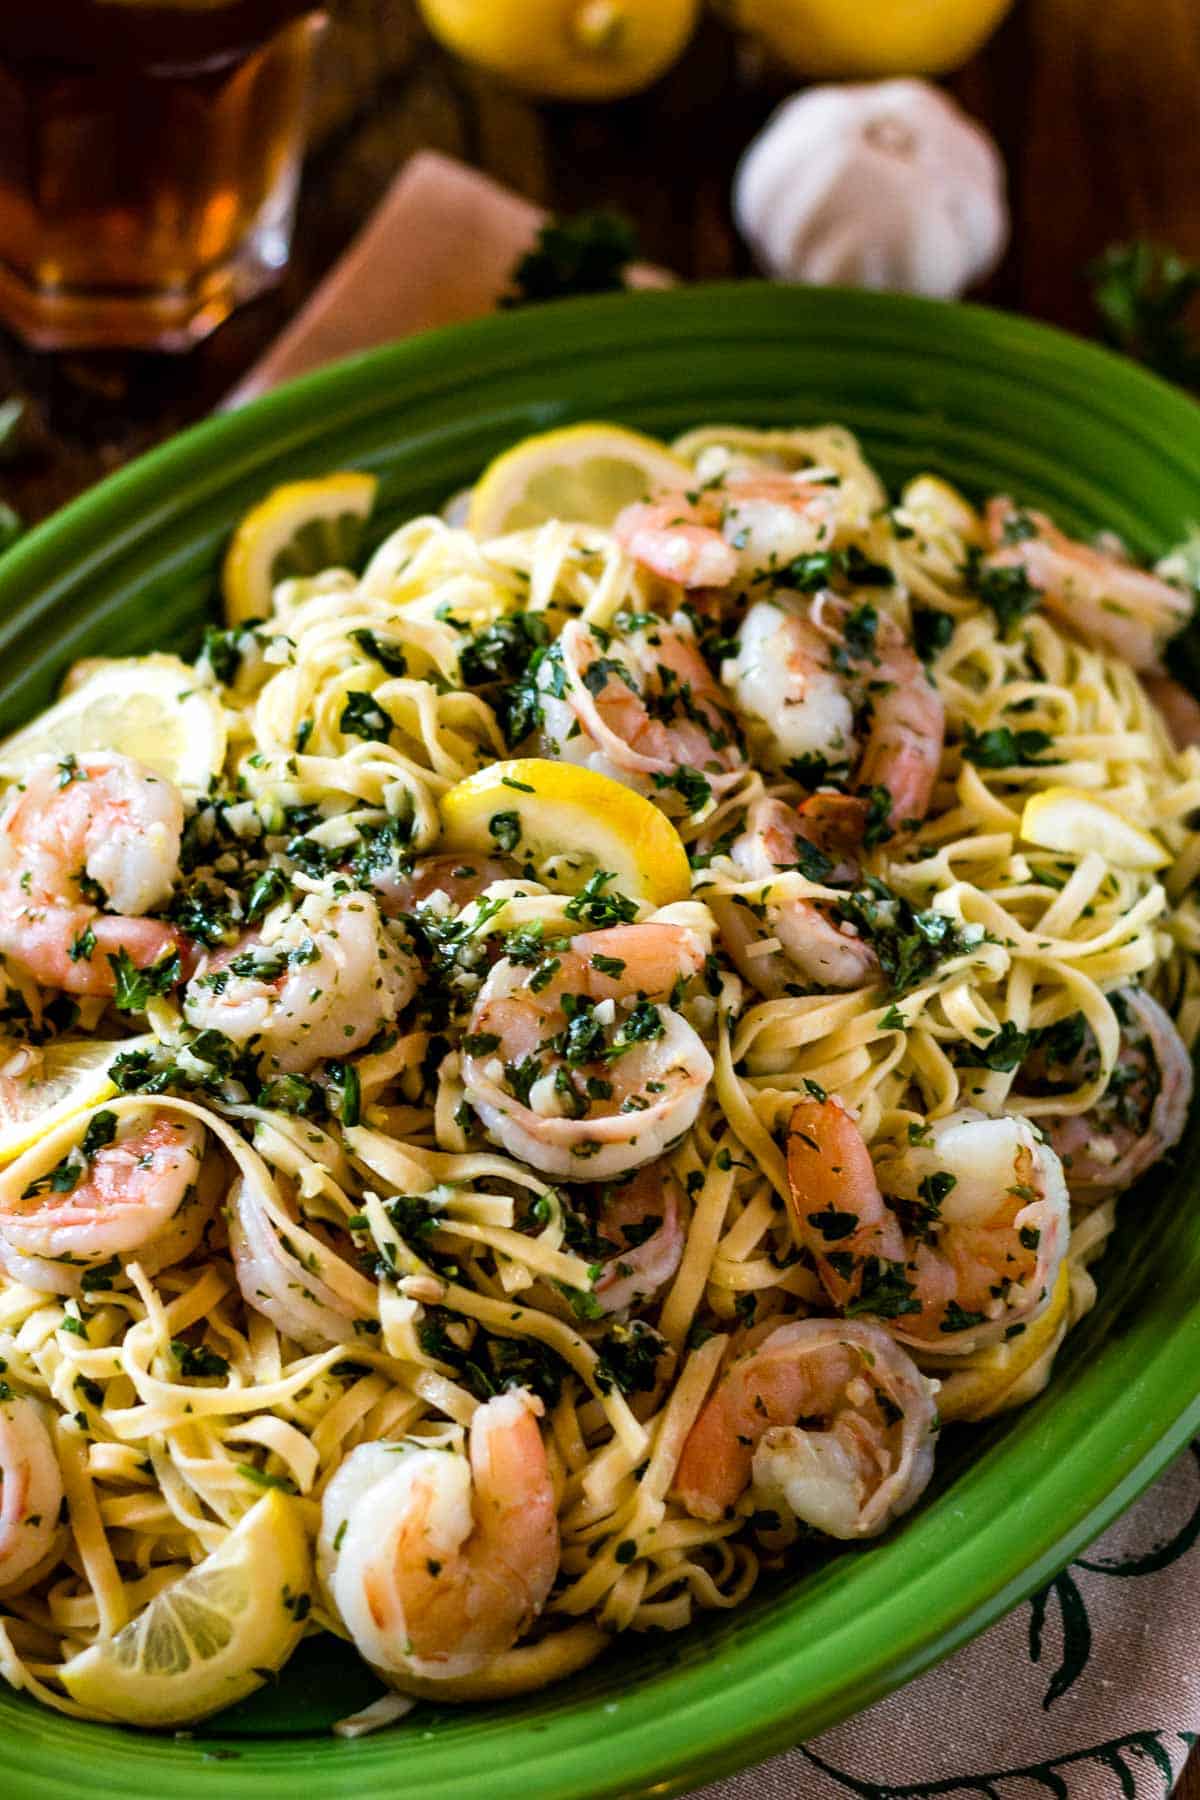 Shrimp with garlic scampi sauce and pasta in a bowl from the top view.